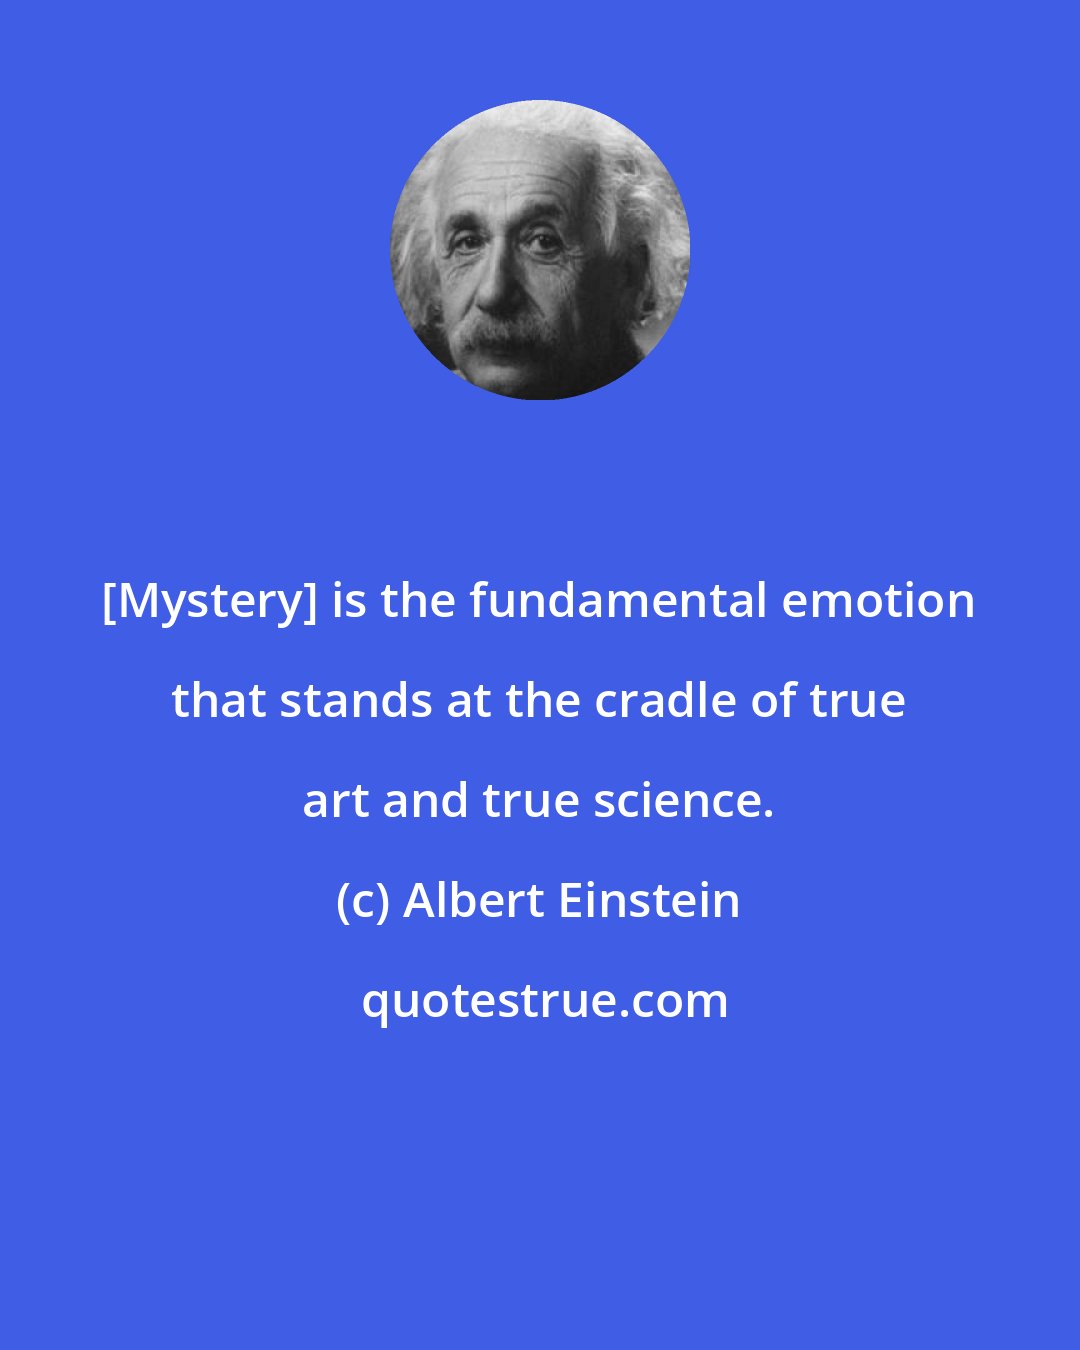 Albert Einstein: [Mystery] is the fundamental emotion that stands at the cradle of true art and true science.